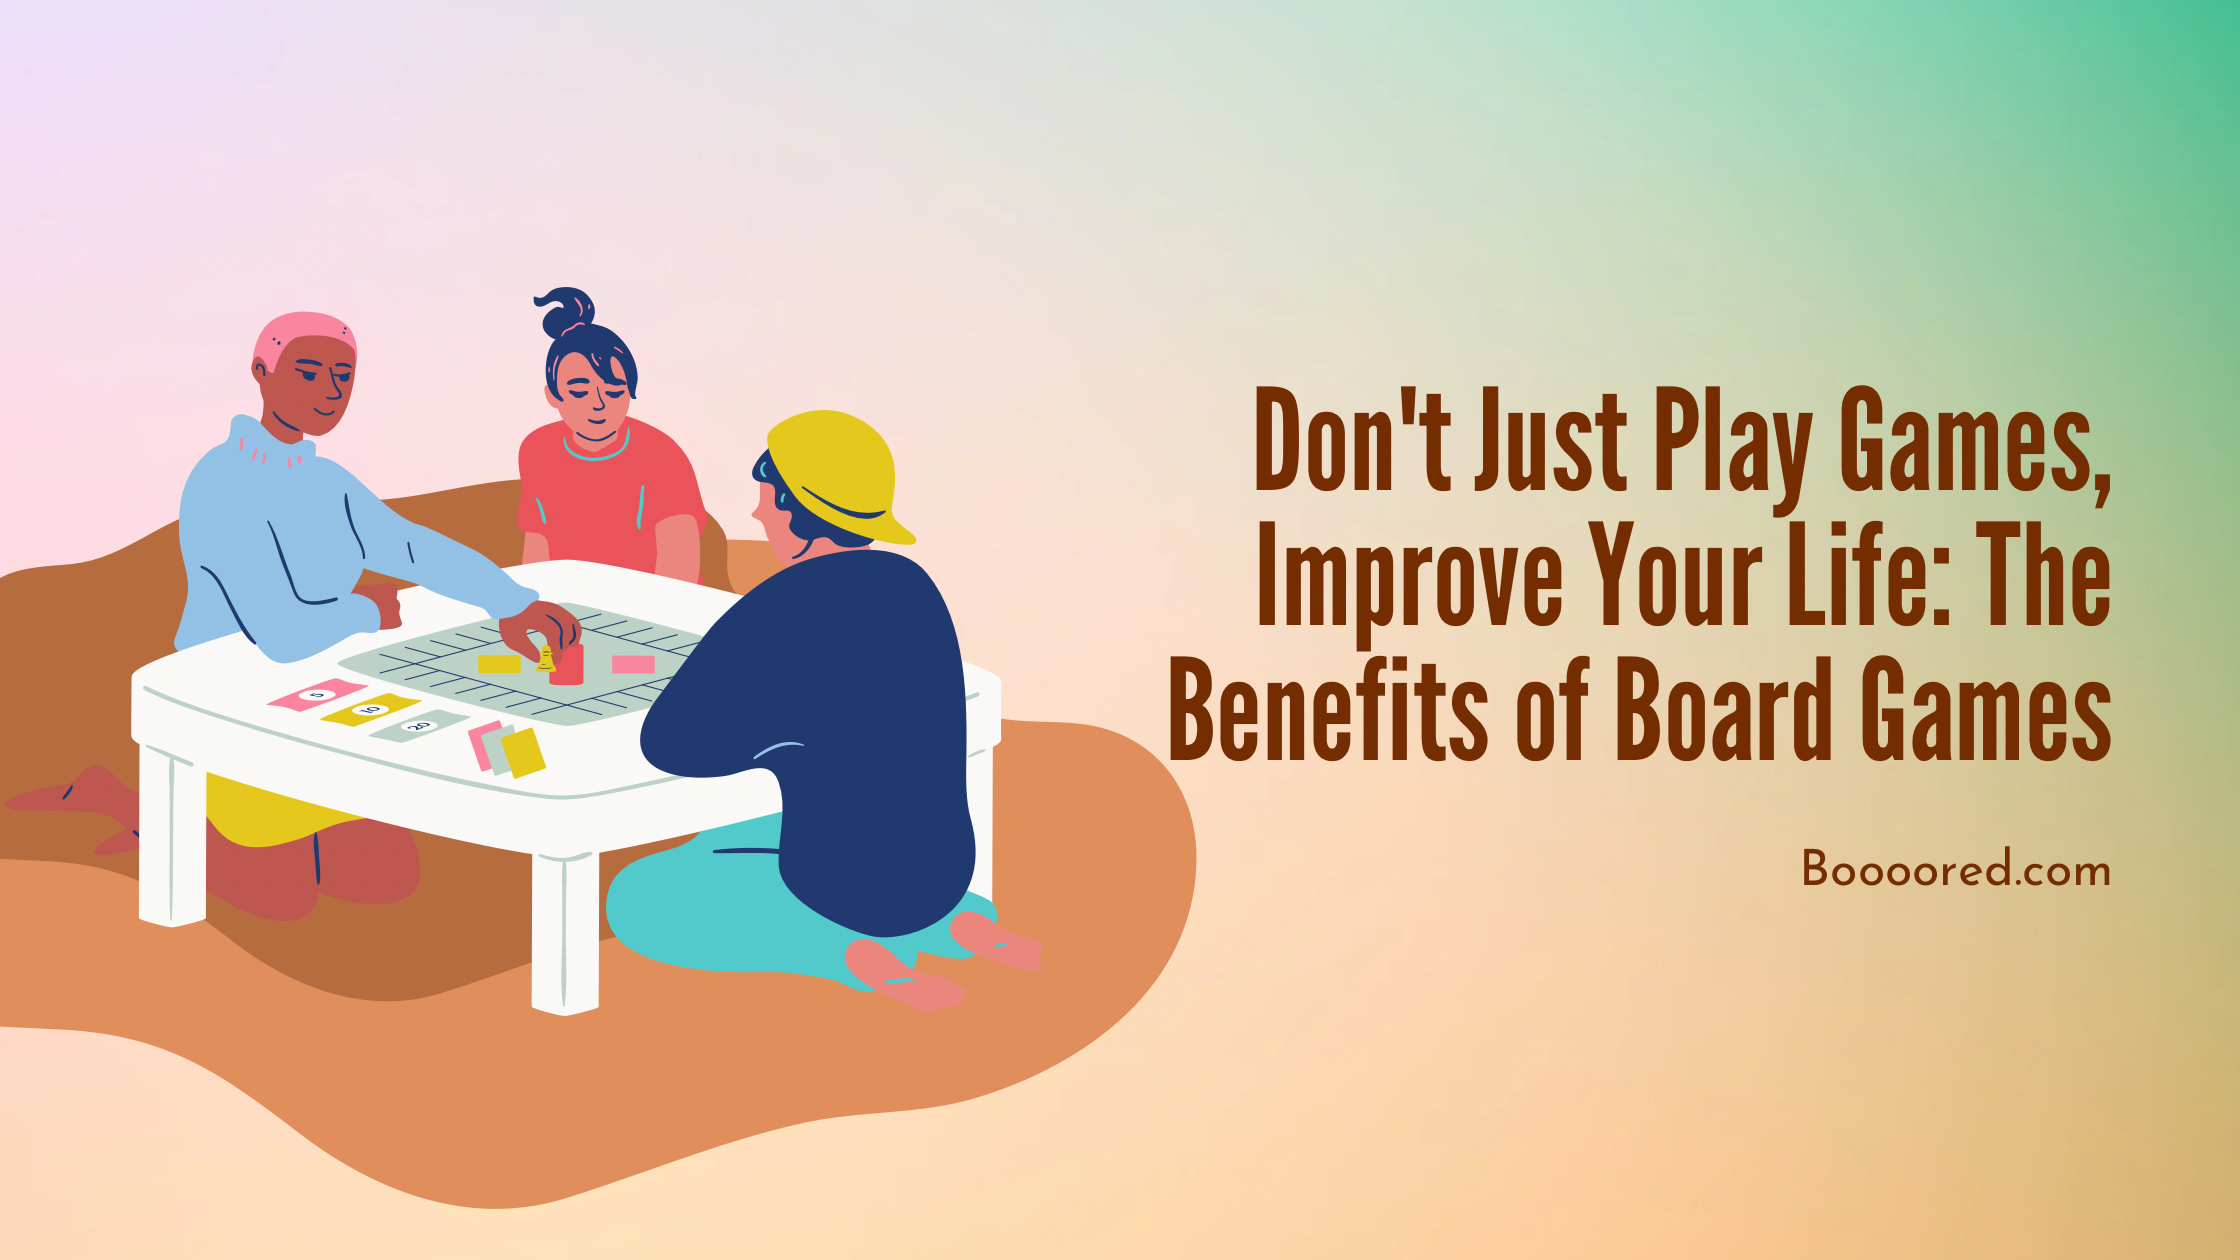 Don’t Just Play Games, Improve Your Life: The Benefits of Board Games